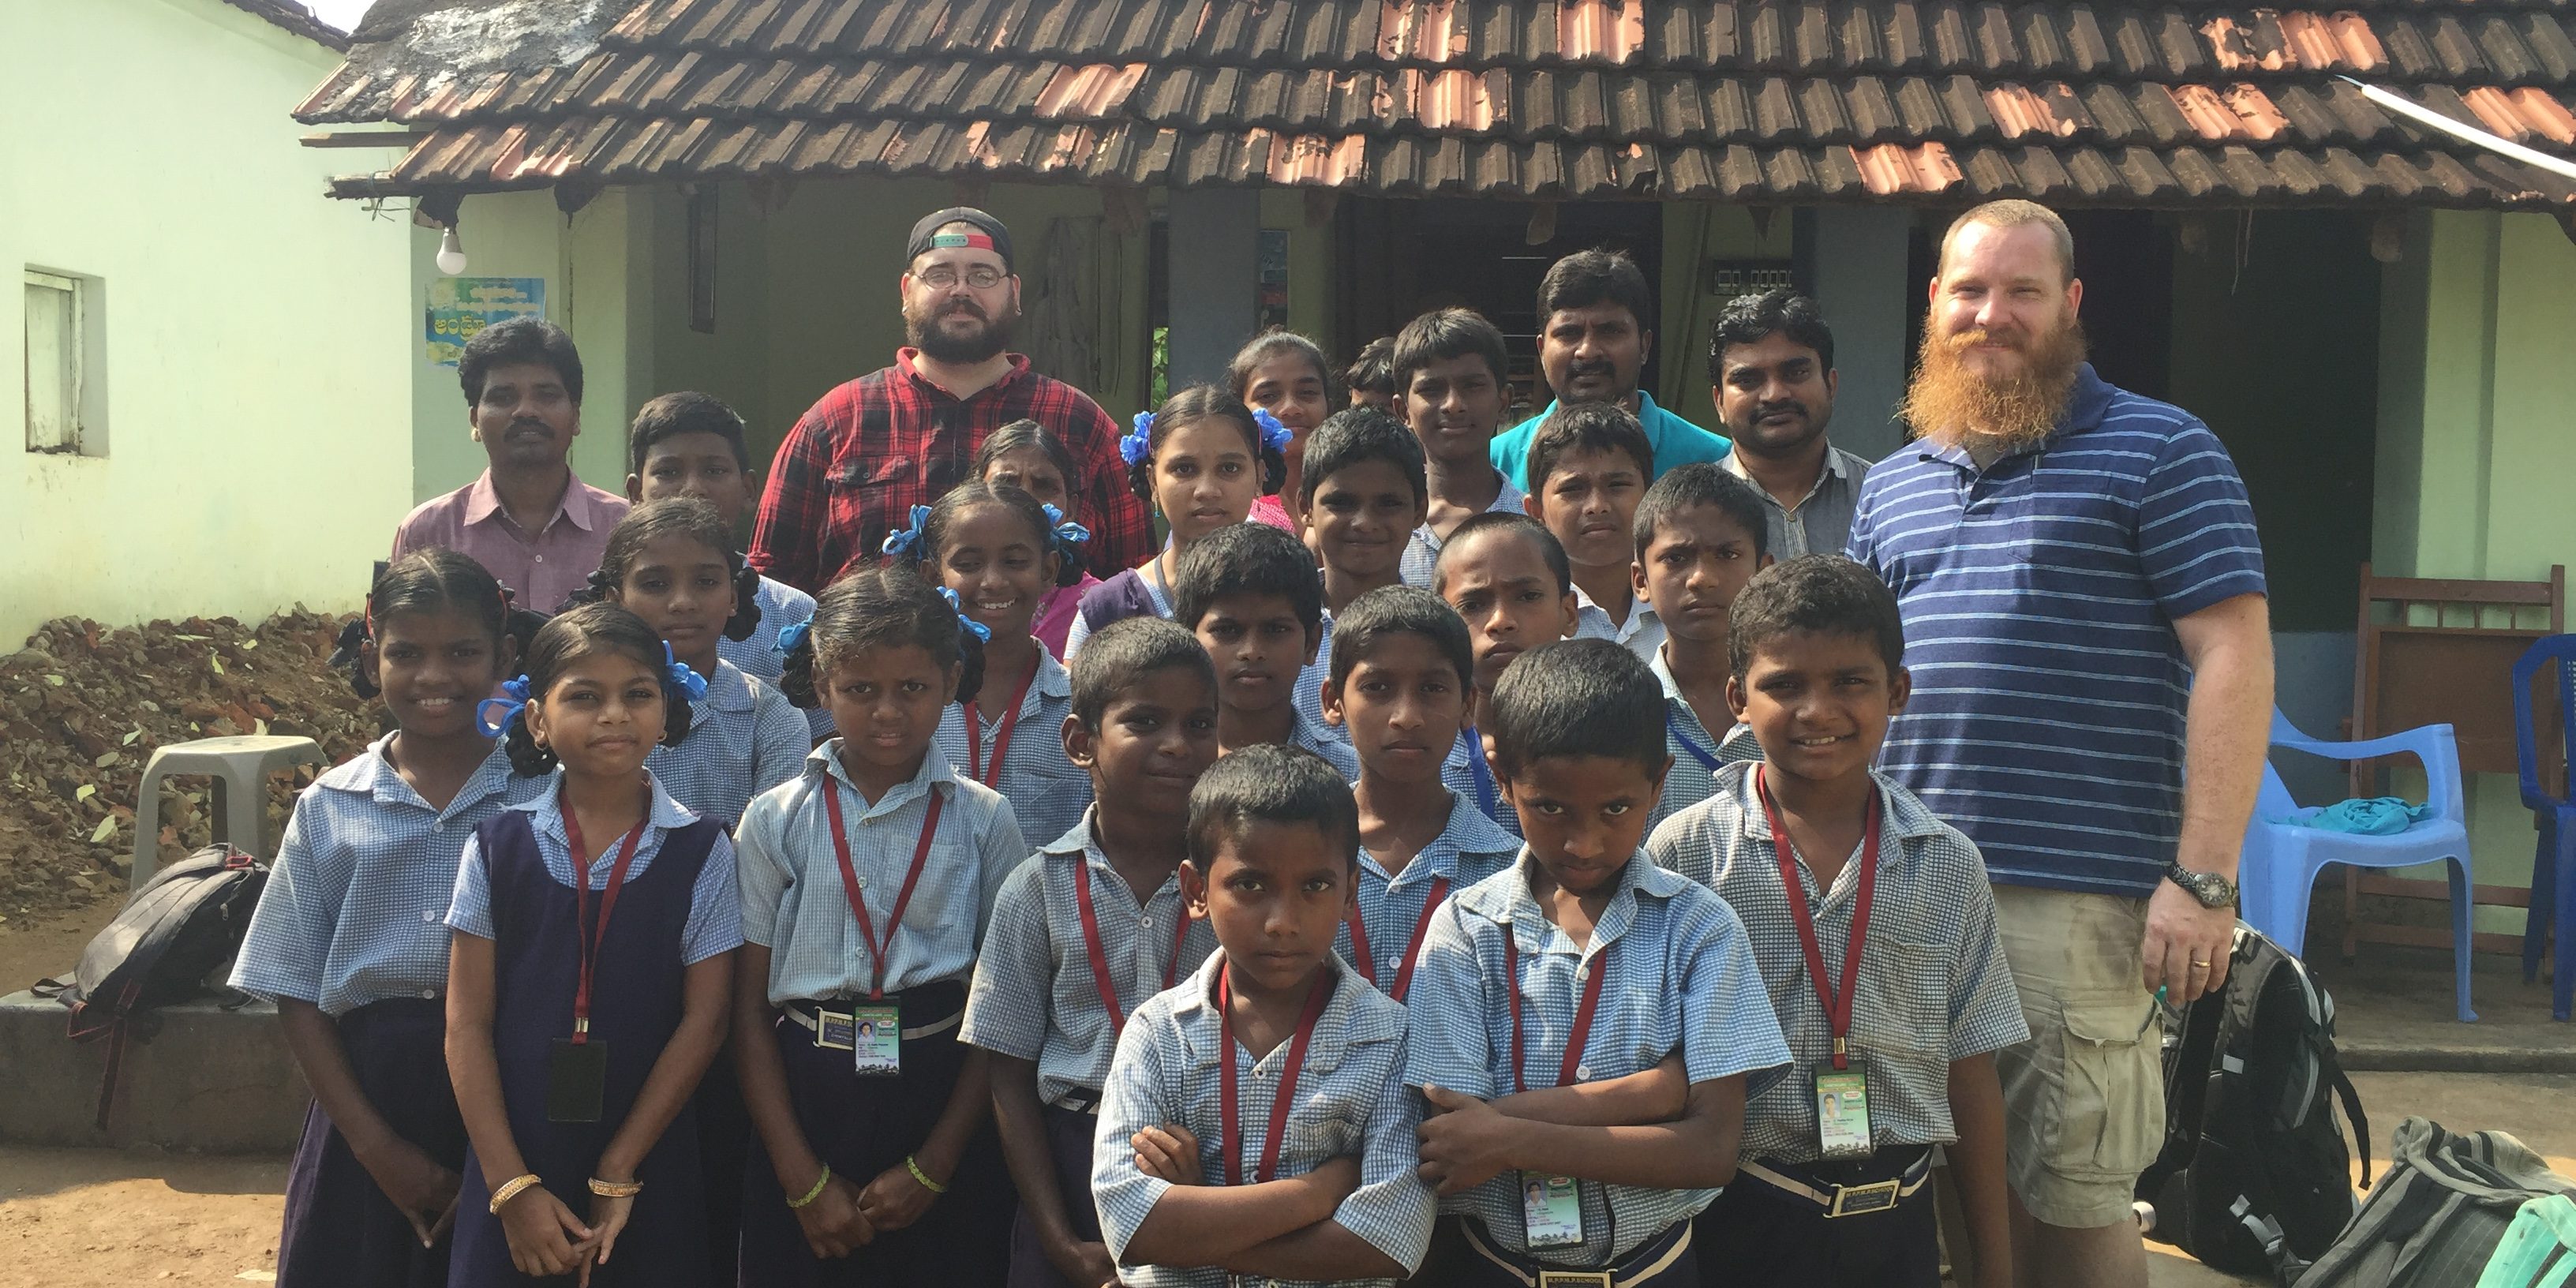 Zach and James with orphans India 2017